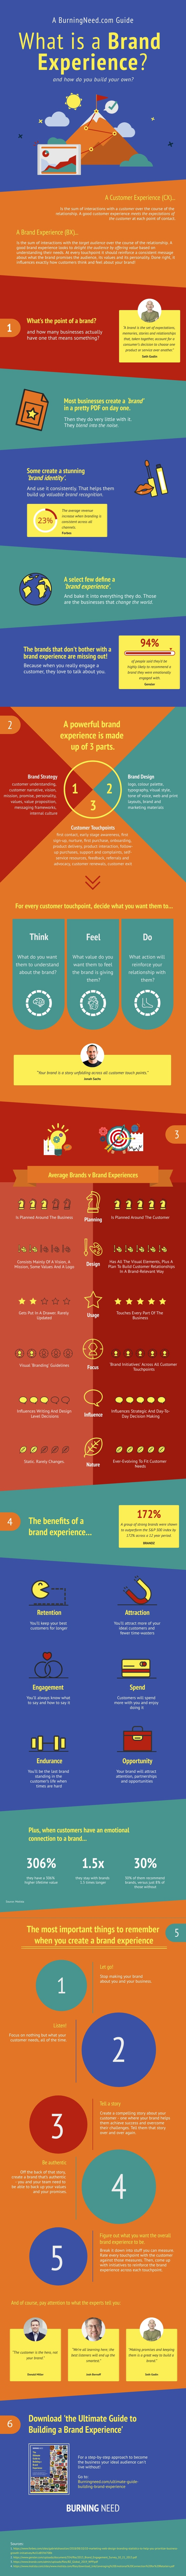 What is a brand experience? Infographic - Burning Need